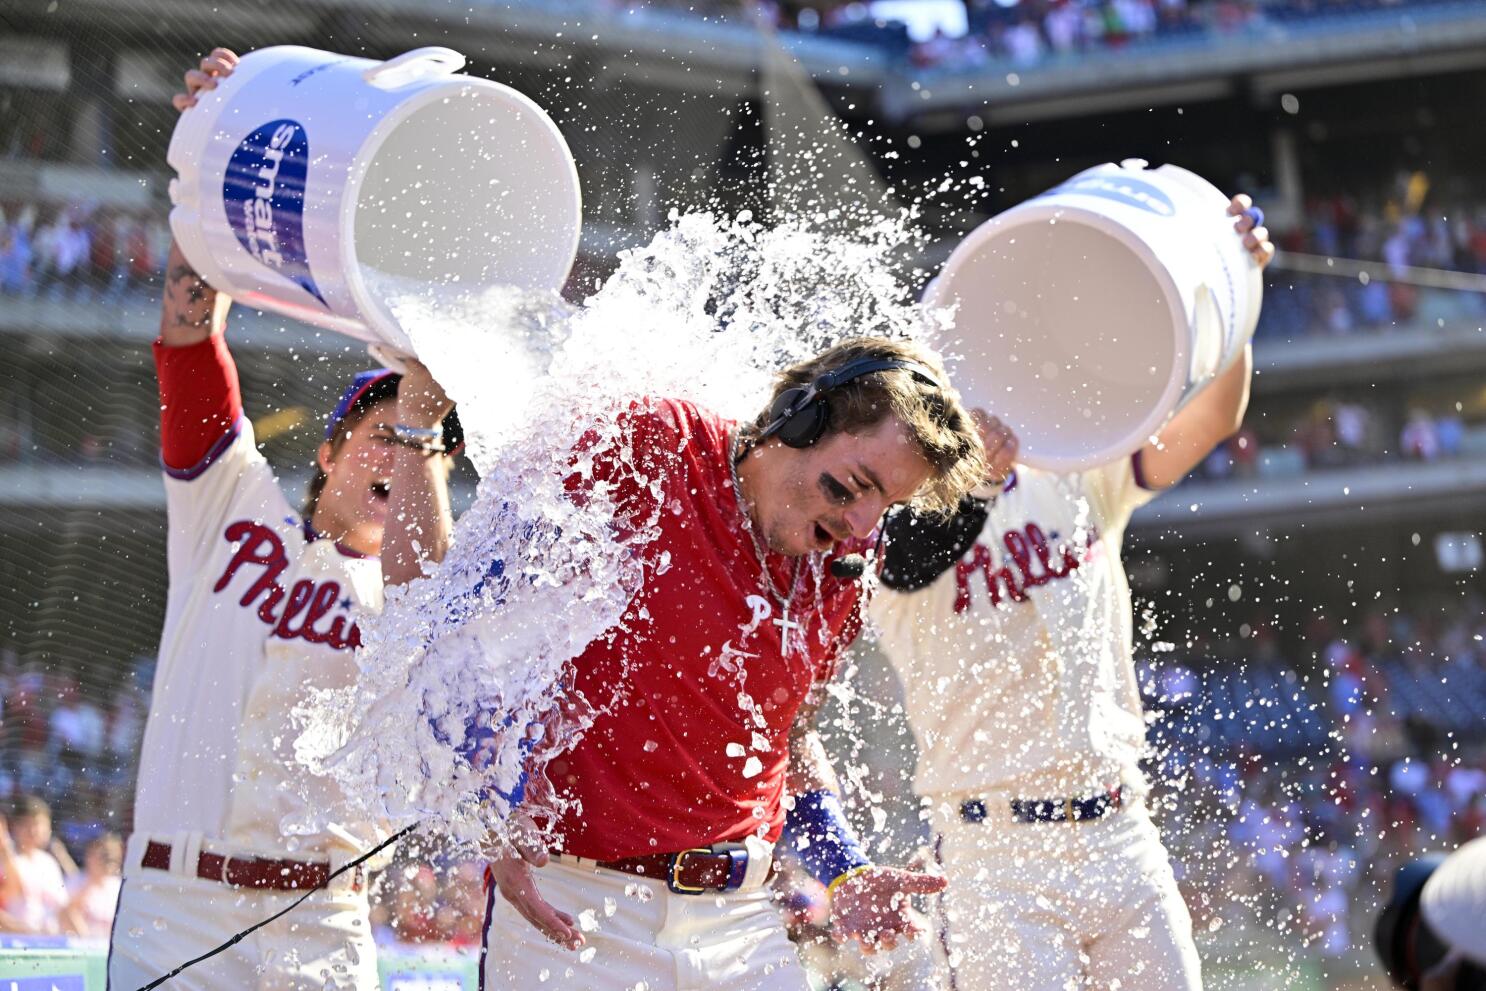 Bryce Harper sparks Phillies comeback, Bryson Stott hits walk-off HR in 9-7  win over Angels